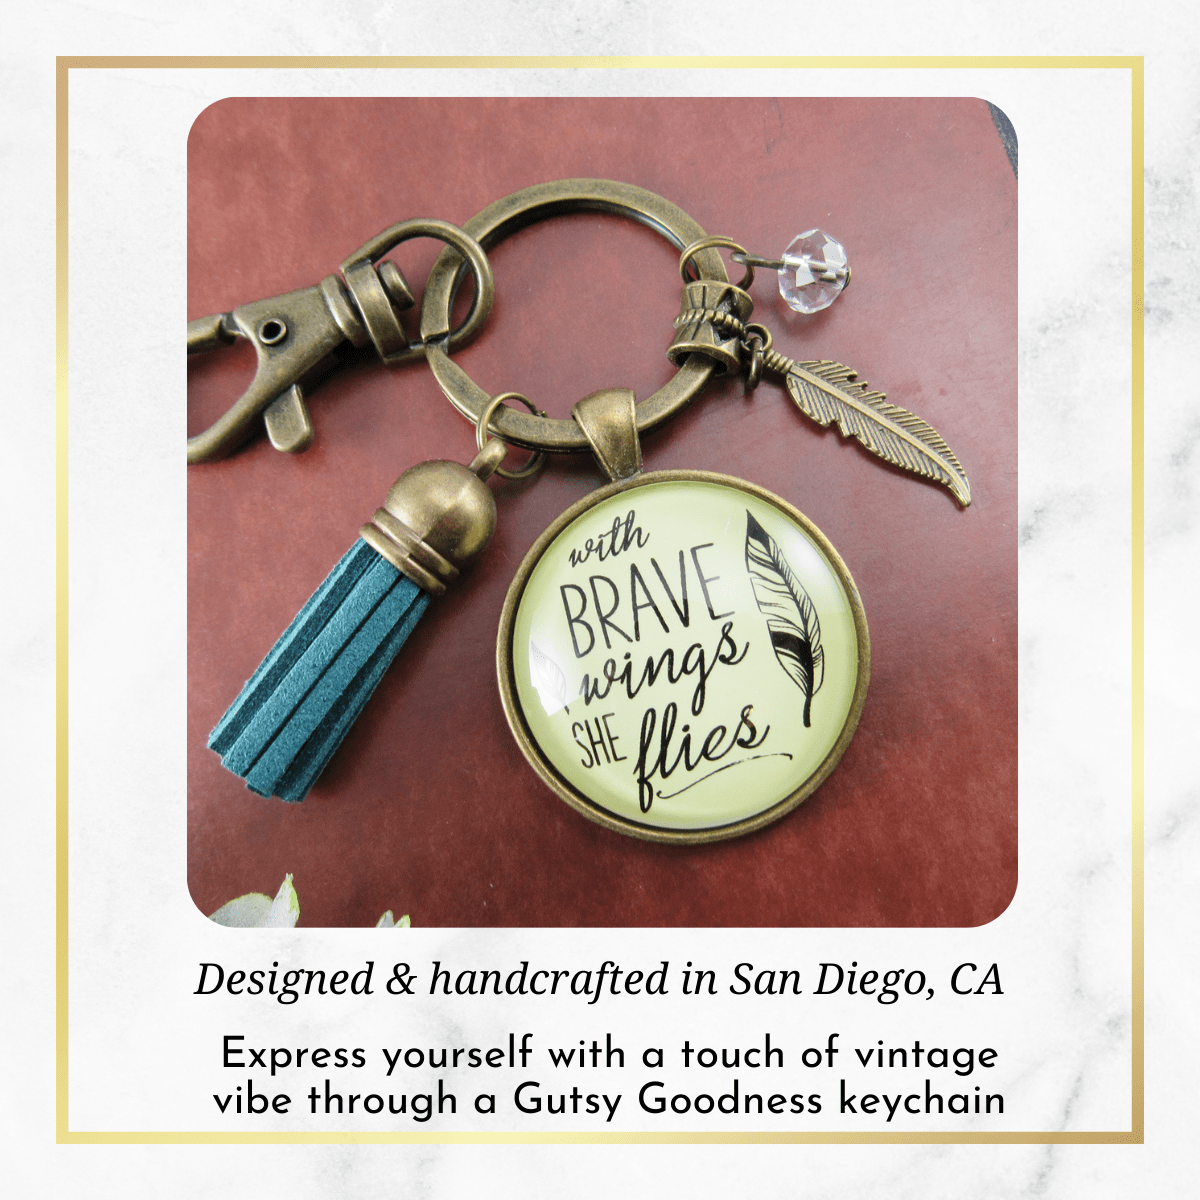 Brave Jewelry With Wings She Flies Style Blue Tassel Keychain For Women Motivational Gift - Gutsy Goodness;Brave Jewelry With Wings She Flies Style Blue Tassel Keychain For Women Motivational Gift - Gutsy Goodness Handmade Jewelry Gifts